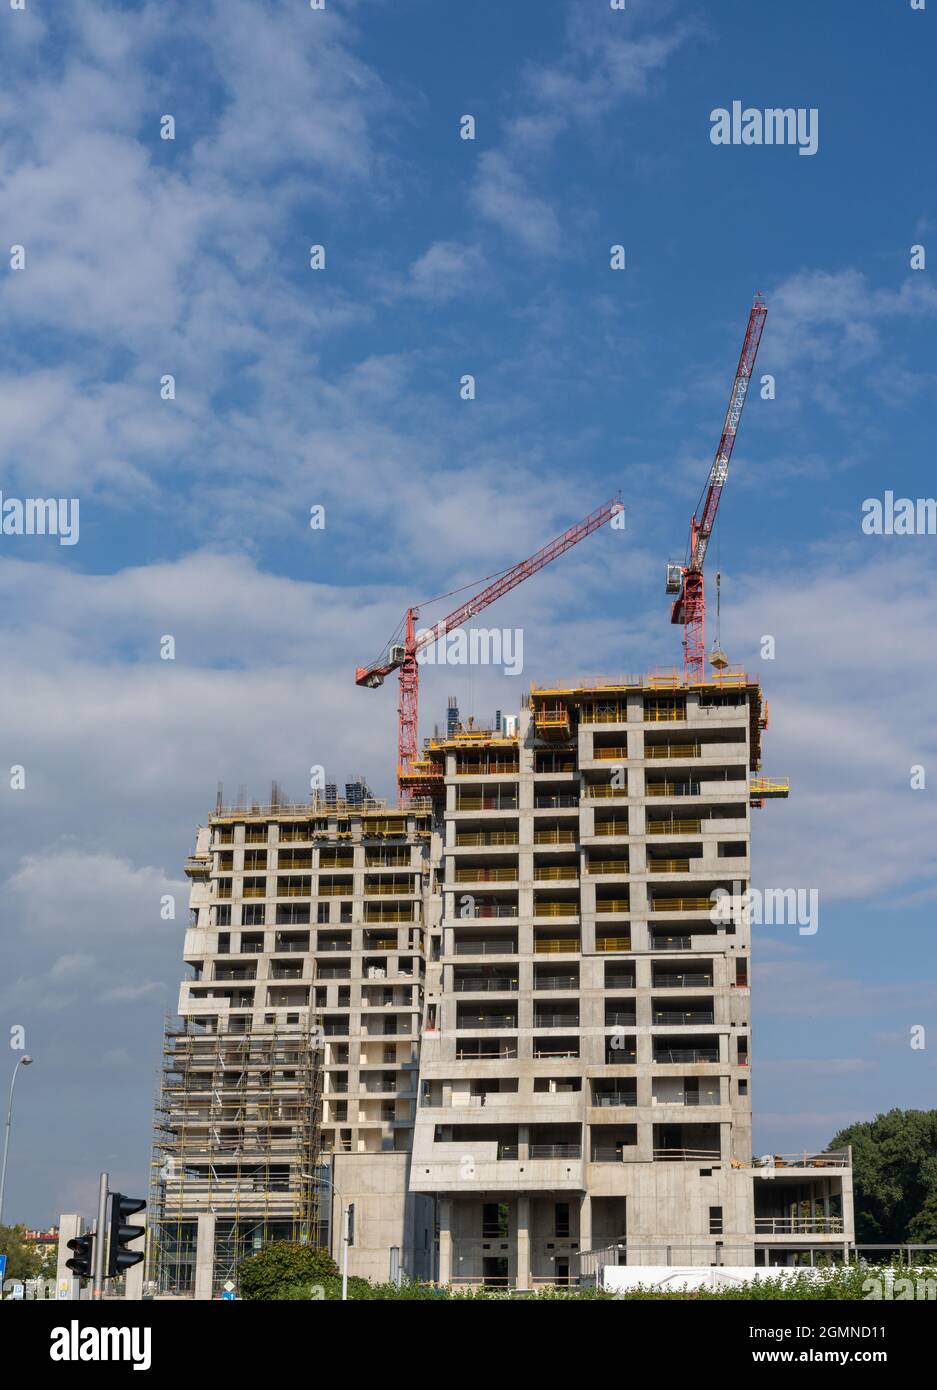 Rzeszow, Poland - 14 September, 2021: construction site with a concrete high-rise skyscraper building and scaffolding and two cranes on top Stock Photo